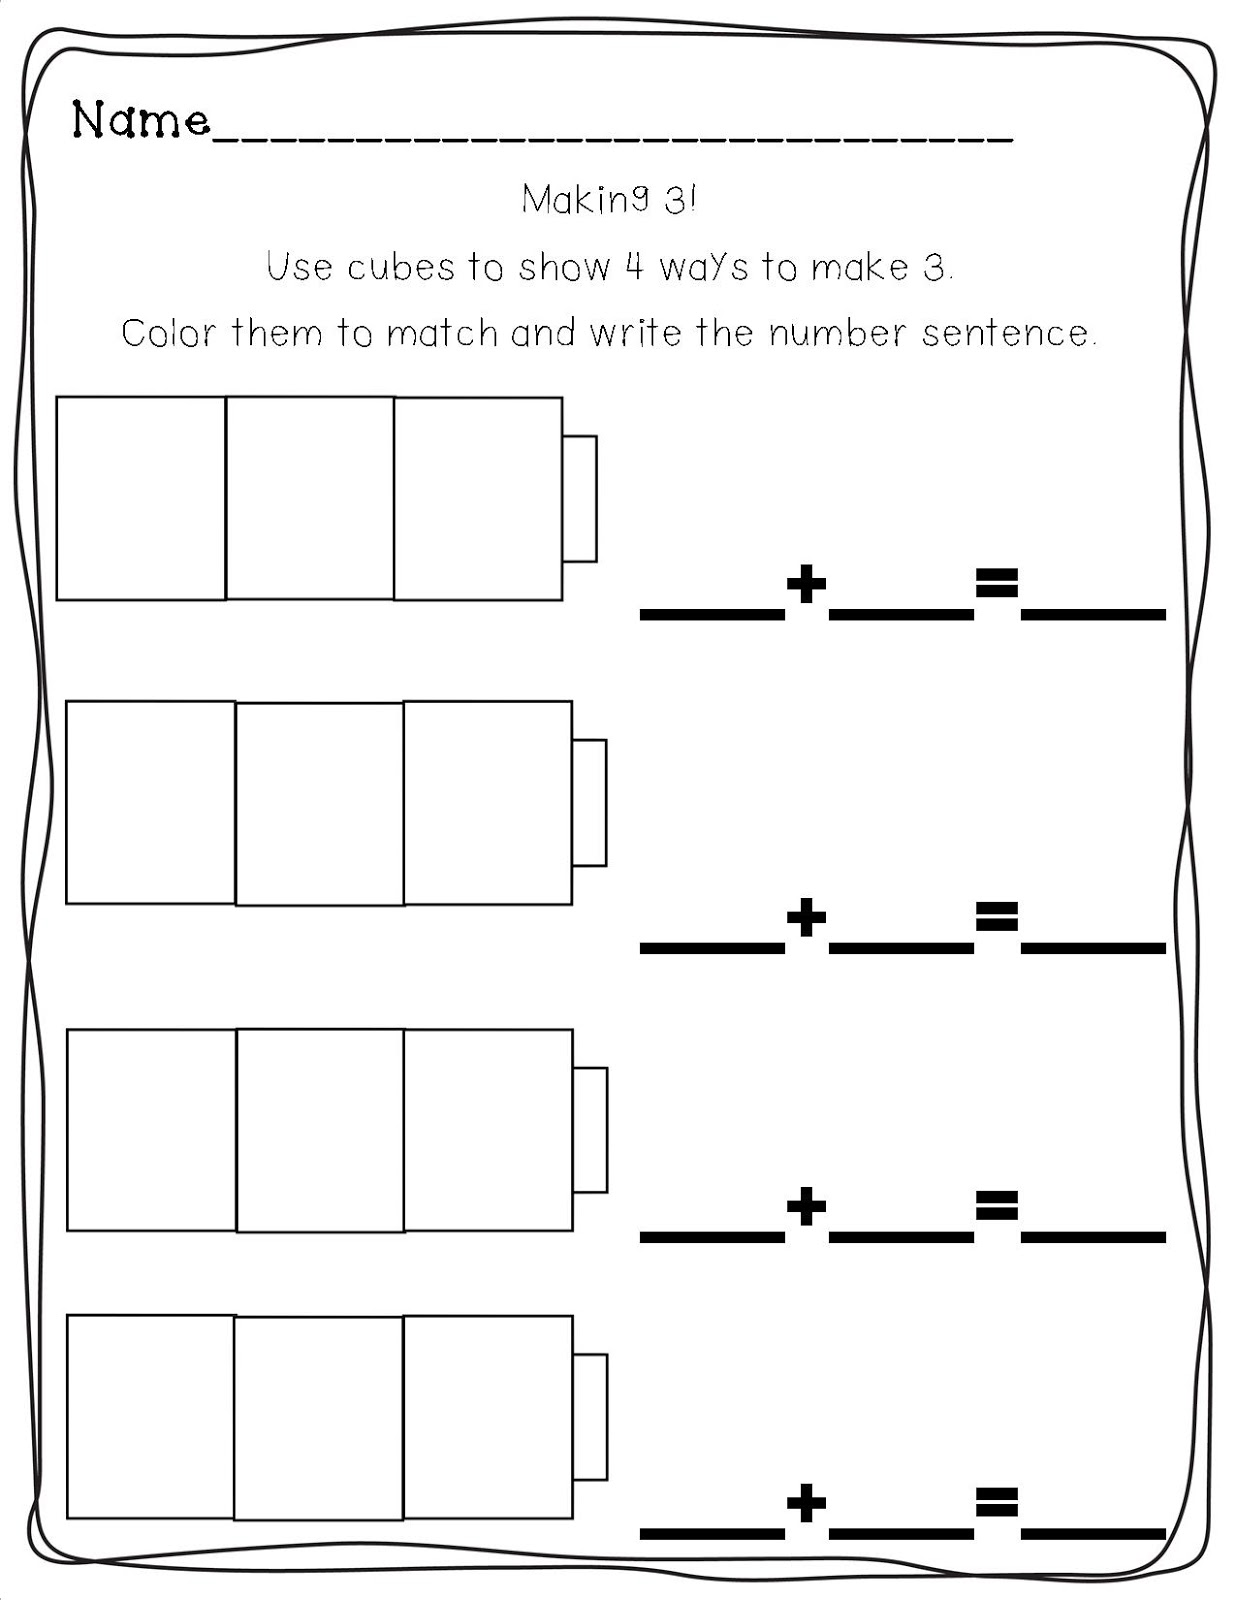 Math: Decomposing And Composing Numbers - Lessons - Blendspace With Regard To Composing And Decomposing Numbers Worksheet